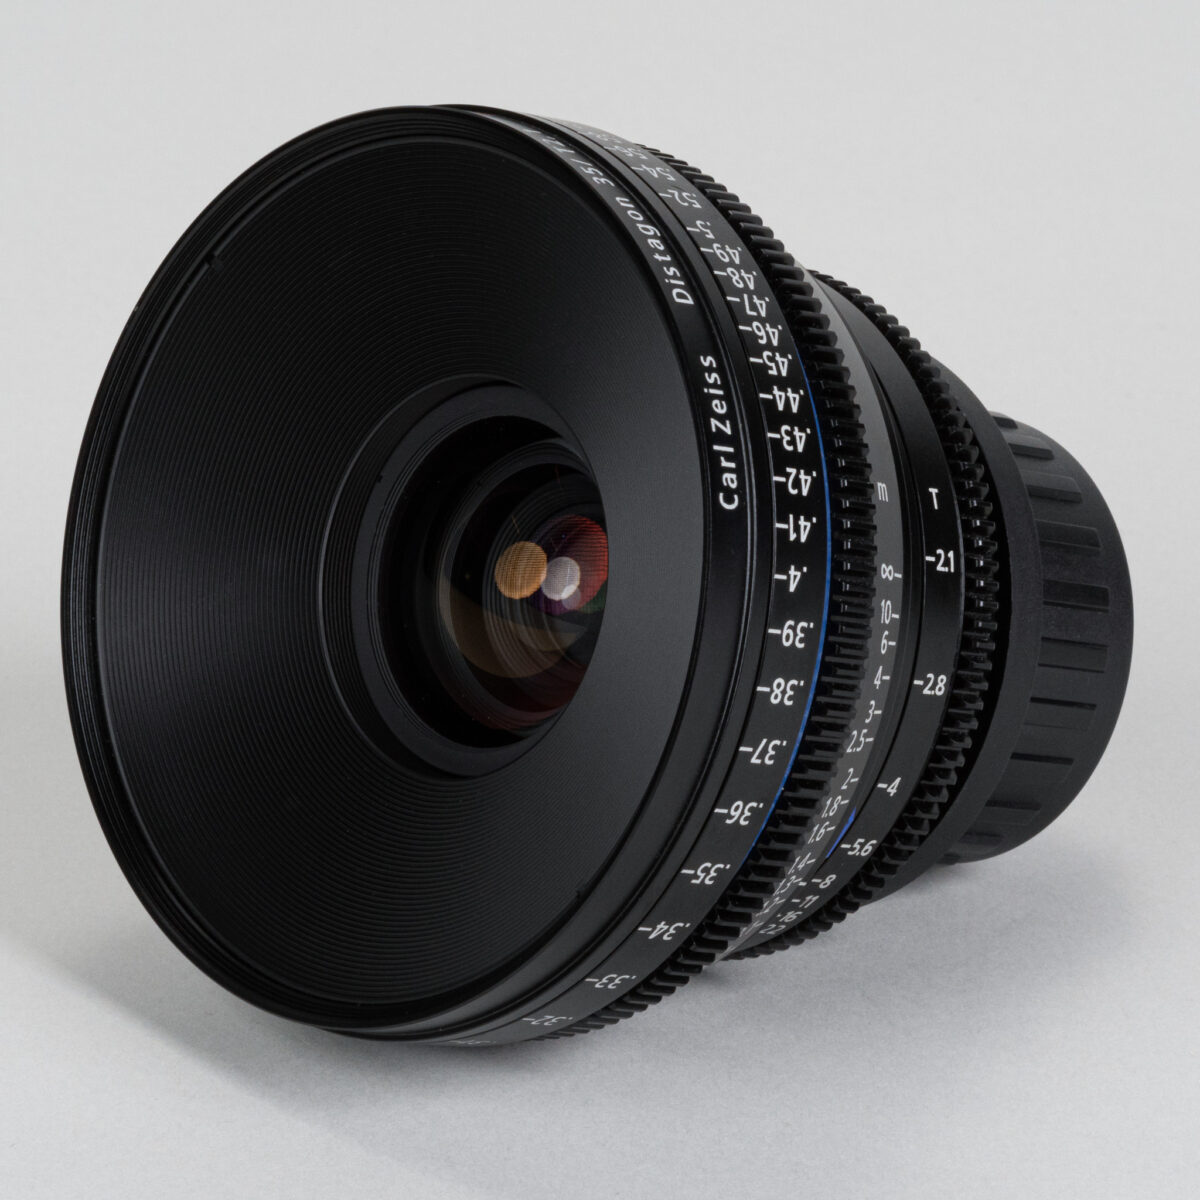 Zeiss Compact Prime CP.2 35